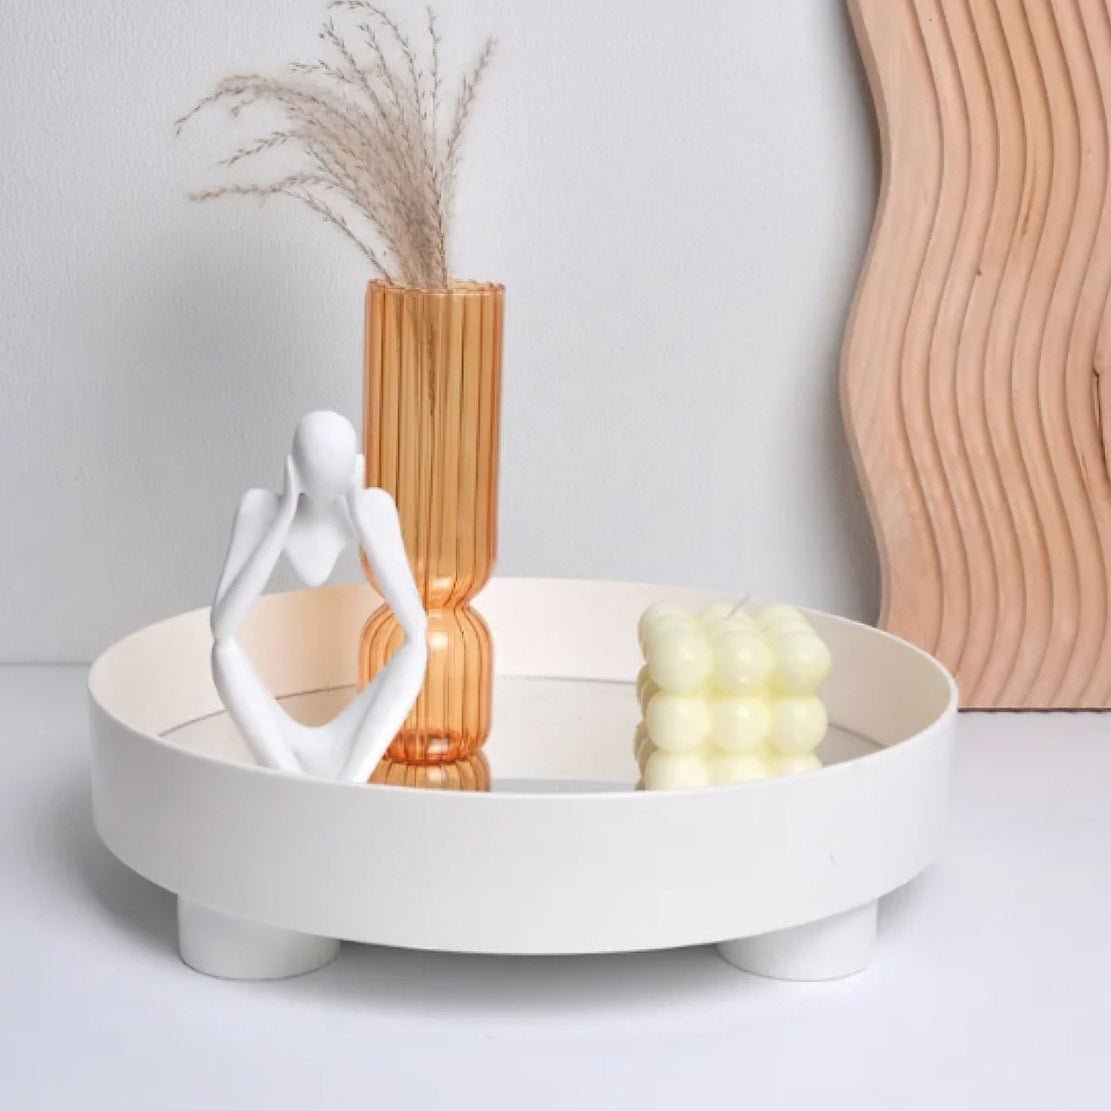 White, round, elevated storage tray, holding a statue, an orange glass flower vase and candle